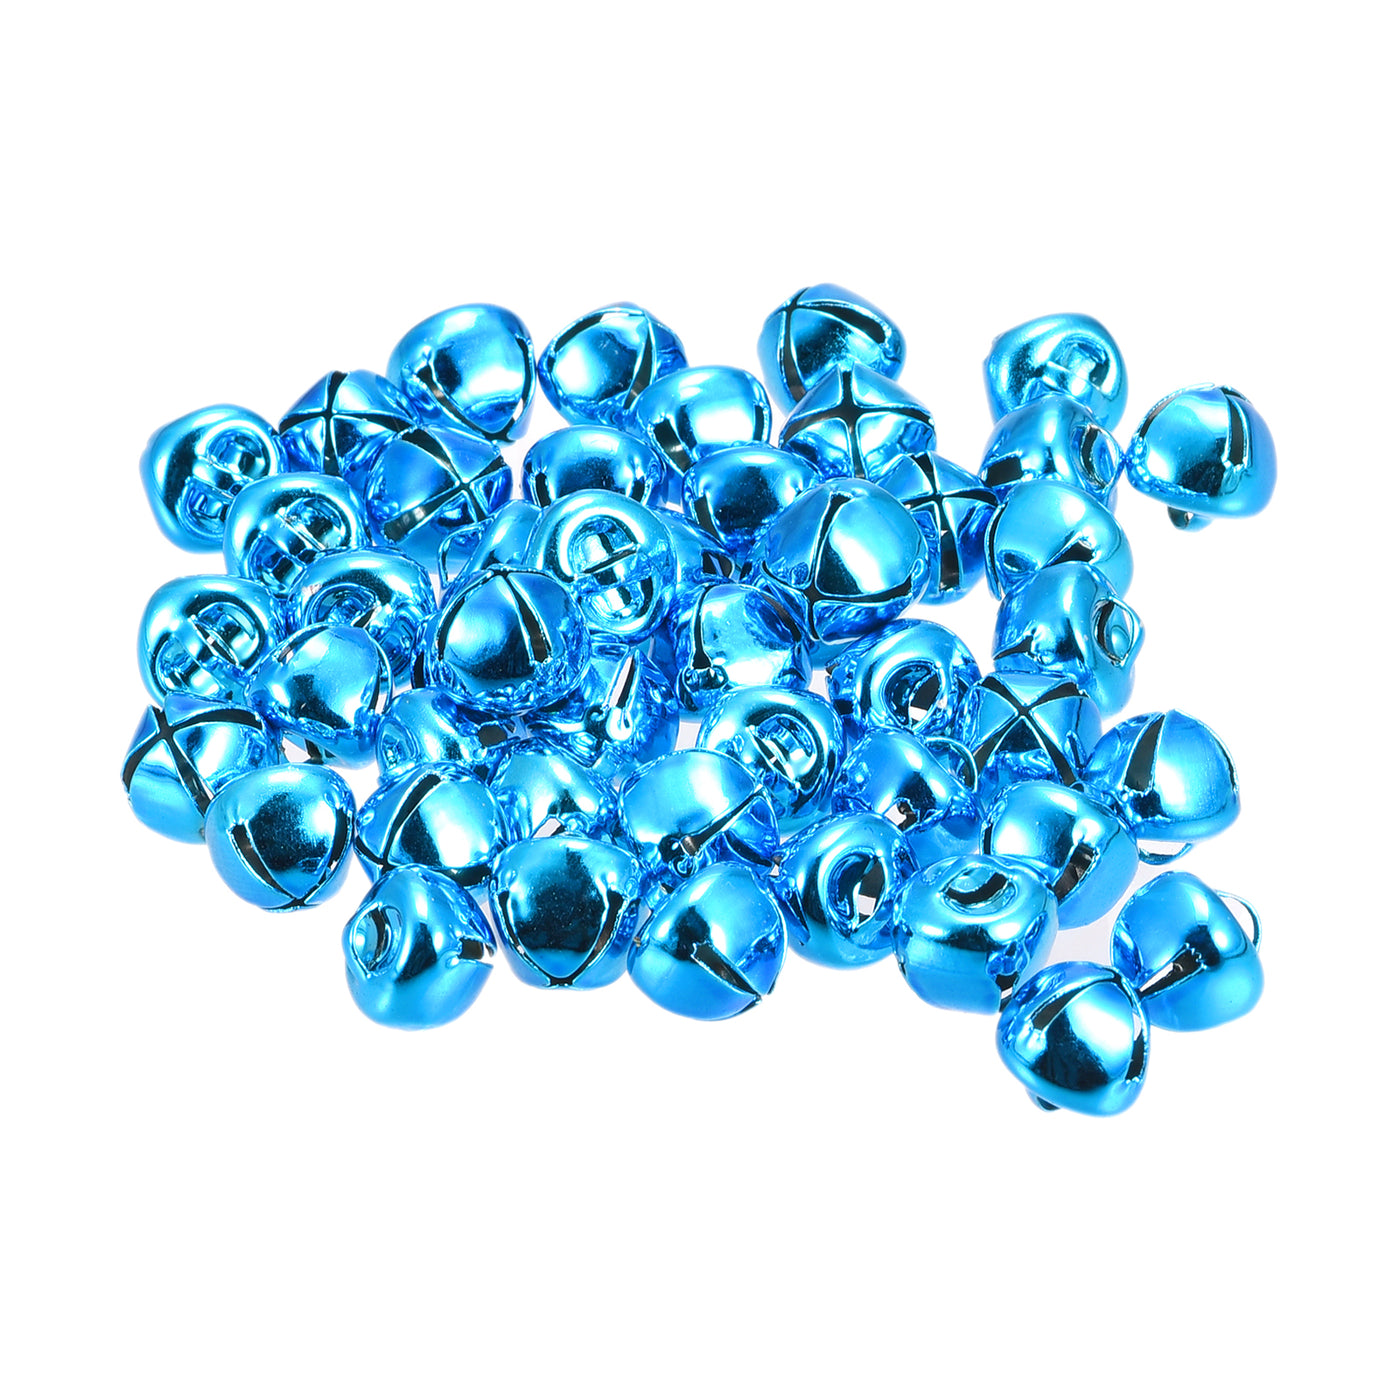 uxcell Uxcell Jingle Bells, 10mm 24pcs Small Bells for Crafts DIY Christmas, Blue